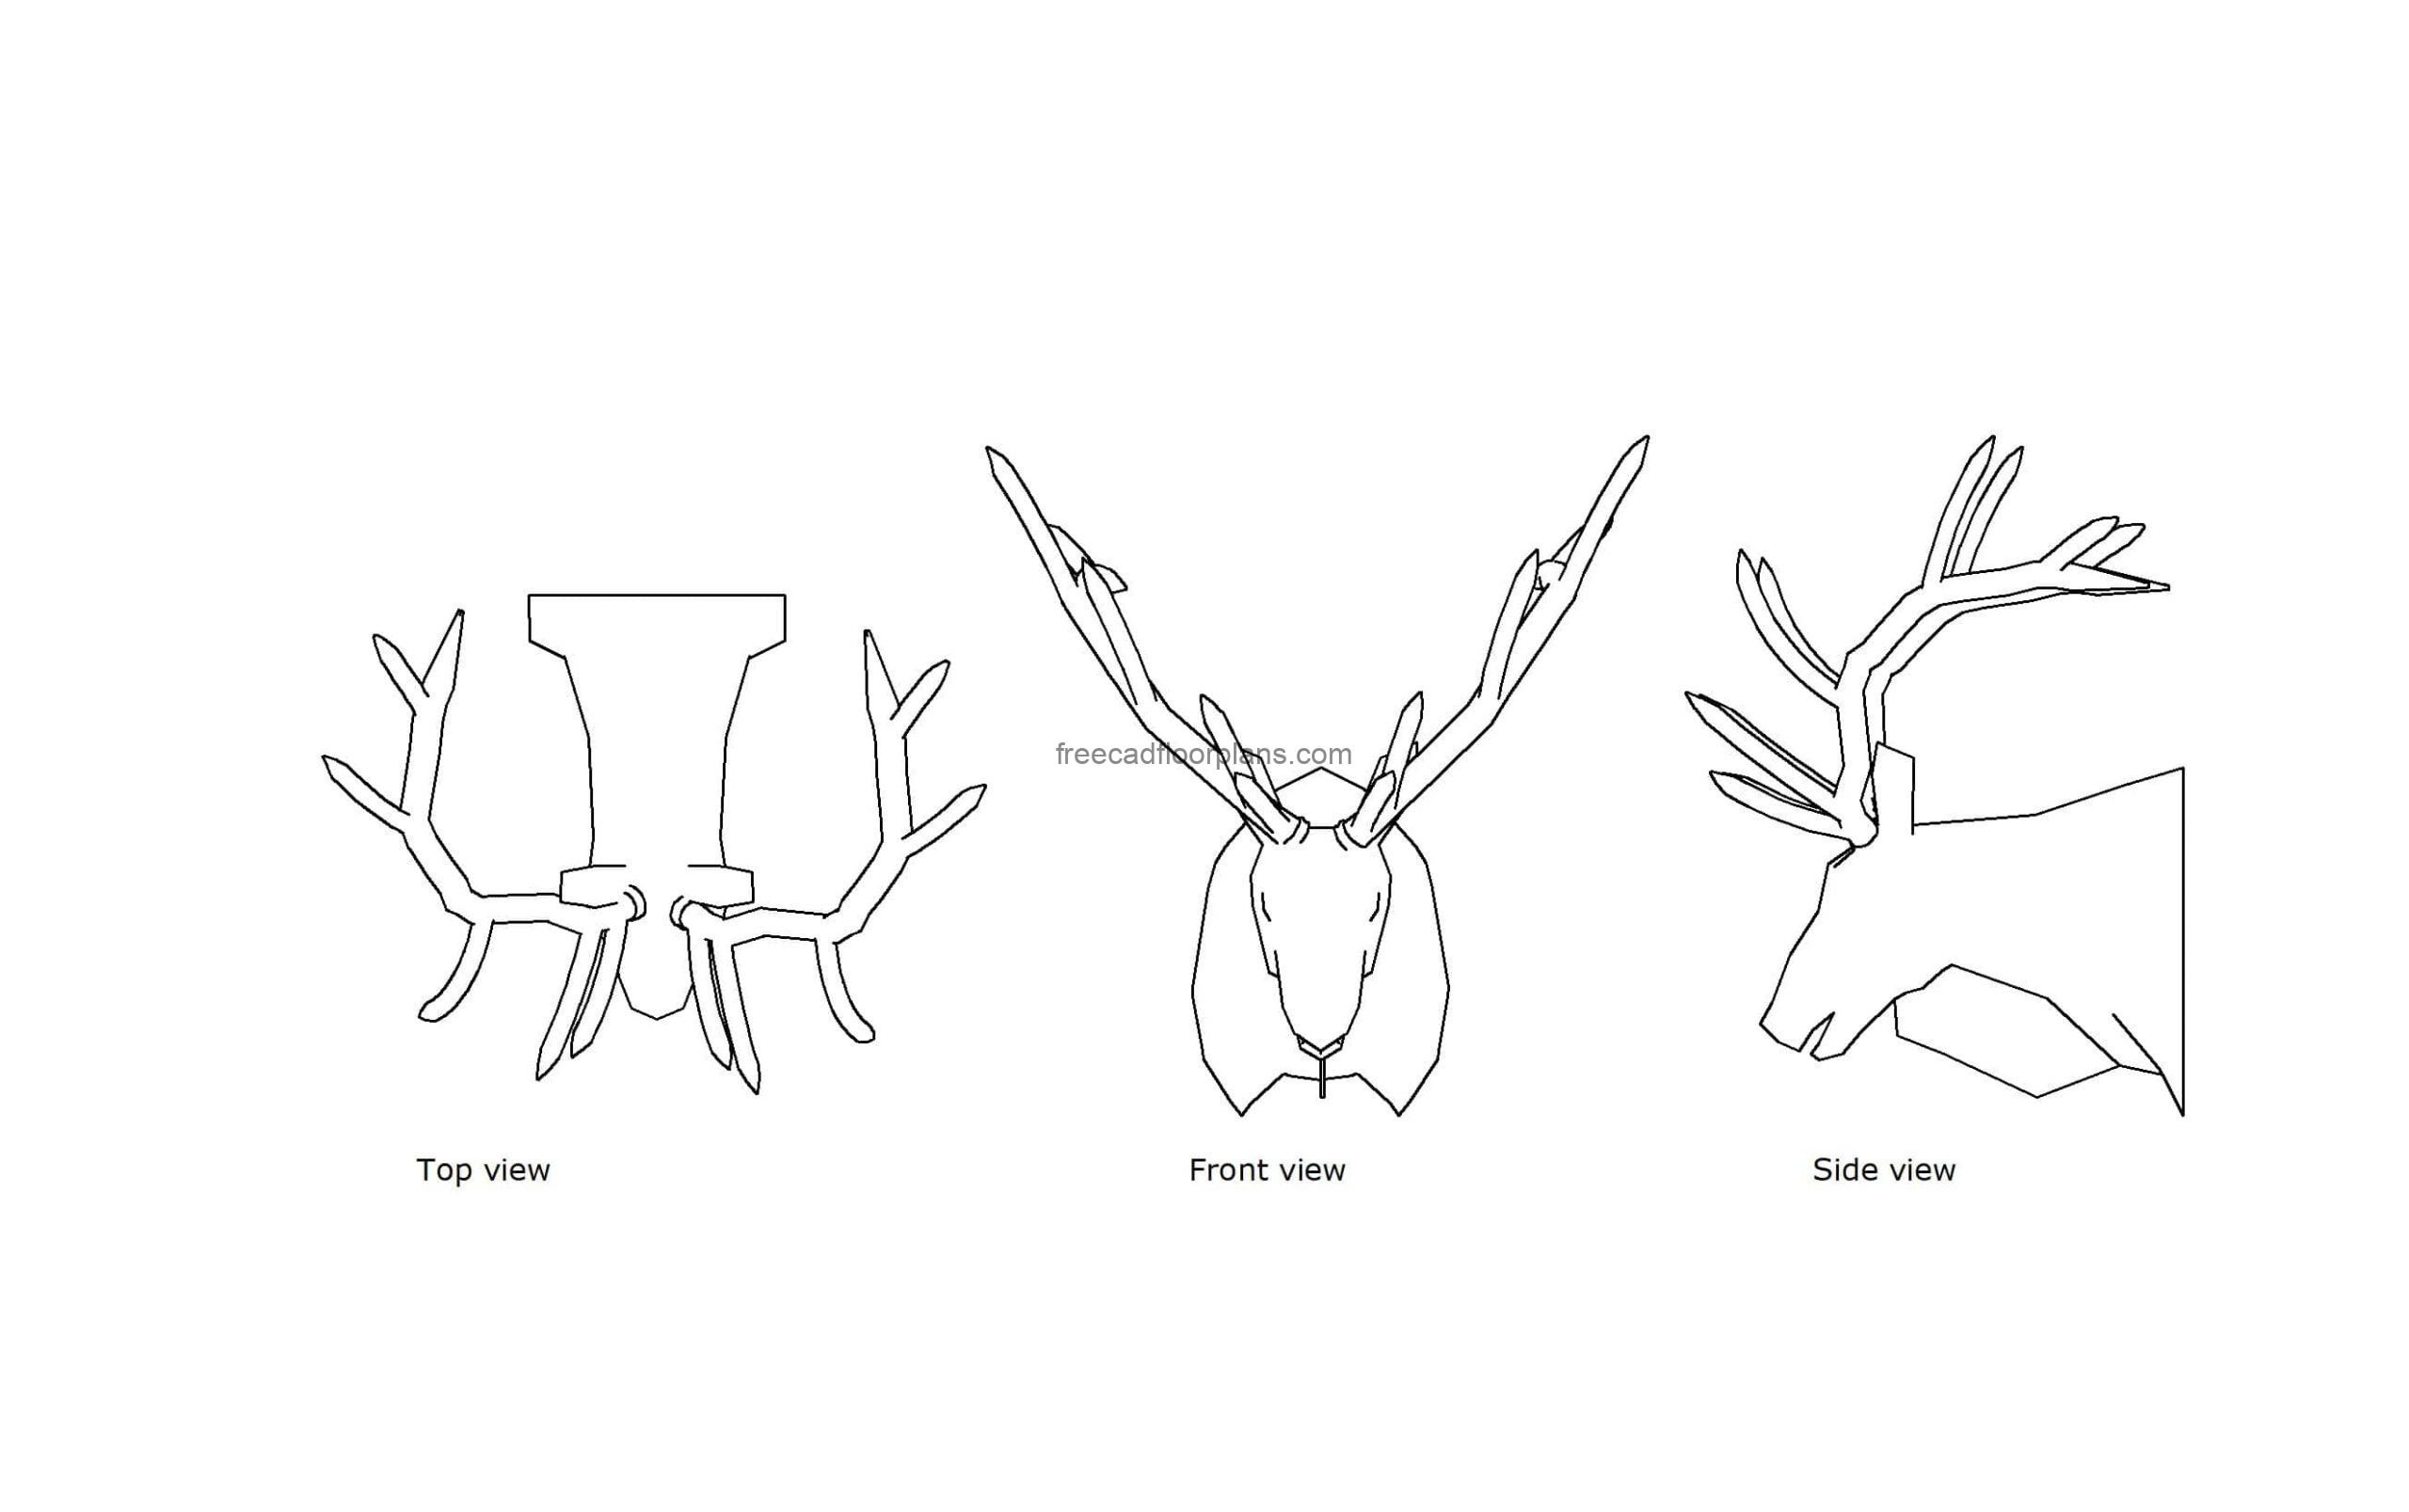 autocad drawing of a mounted elk head, plan and elevation 2d views, dwg file free for download